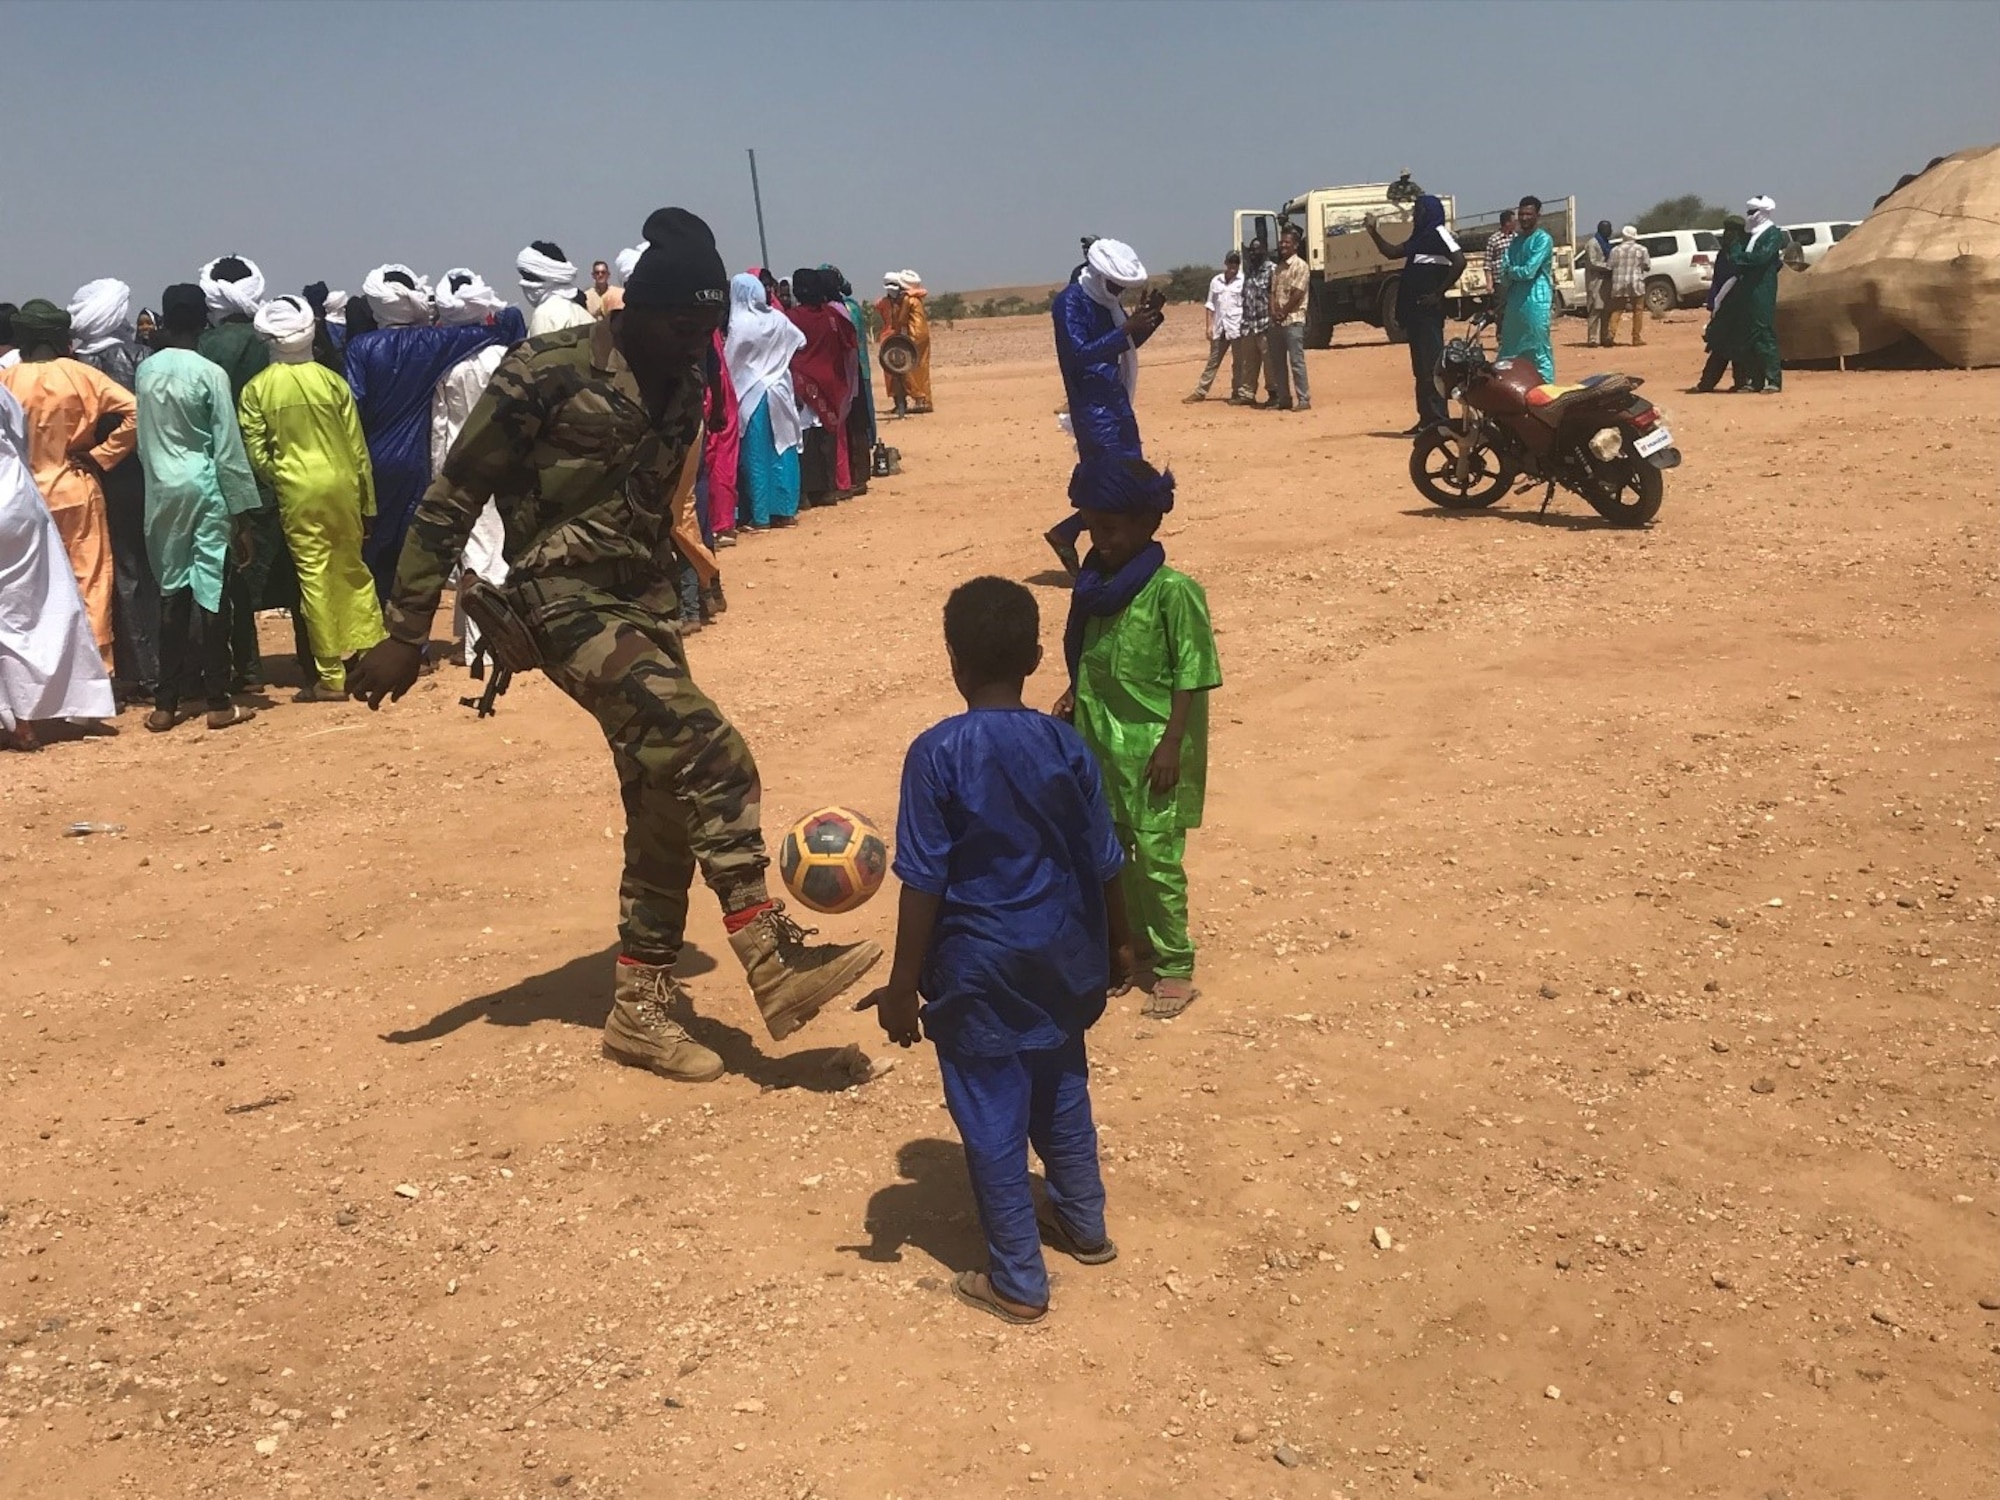 A member of the Forces Armees Nigeriennes Action Civil‐Militaire plays football with children in Teghazert, Niger on Sept 8, 2021.  Footballs, due to their popularity with the youth, are regularly donated along with other items. (Courtesy photo)